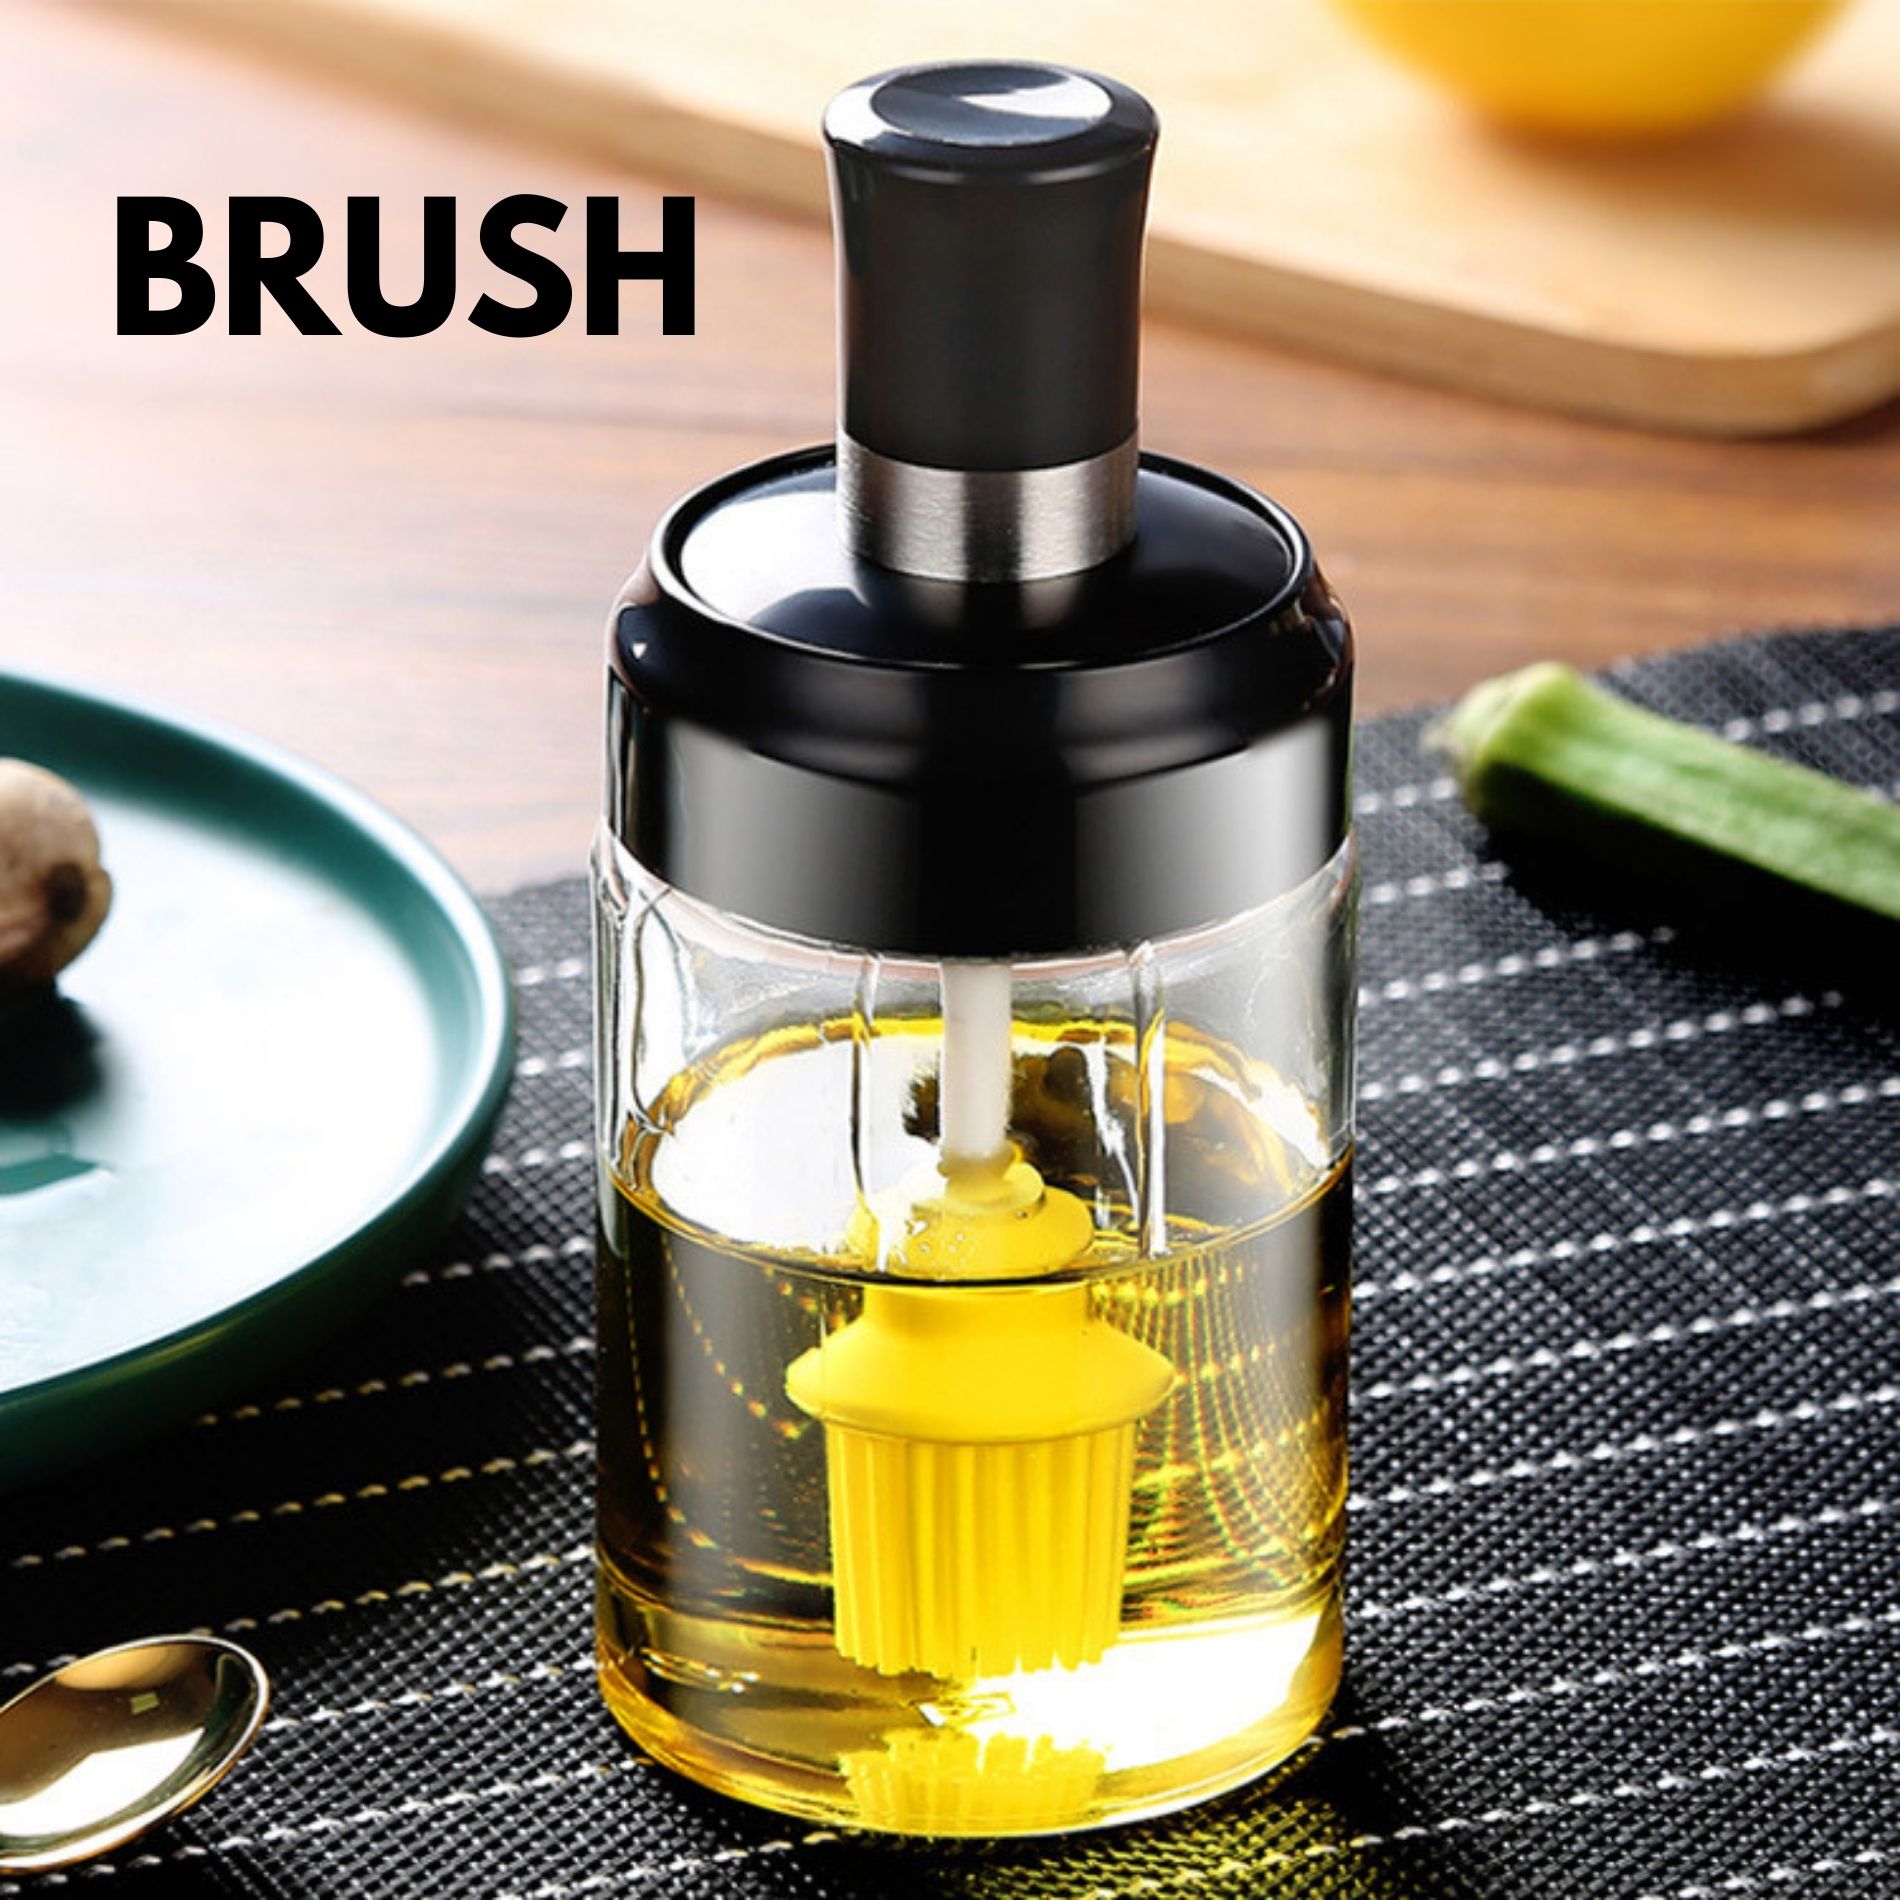 Seasoning Bottle 250ml Glass Jar Dispenser Glass Containers Jar With Spice Spoon / Oil Brush / Honey Stick